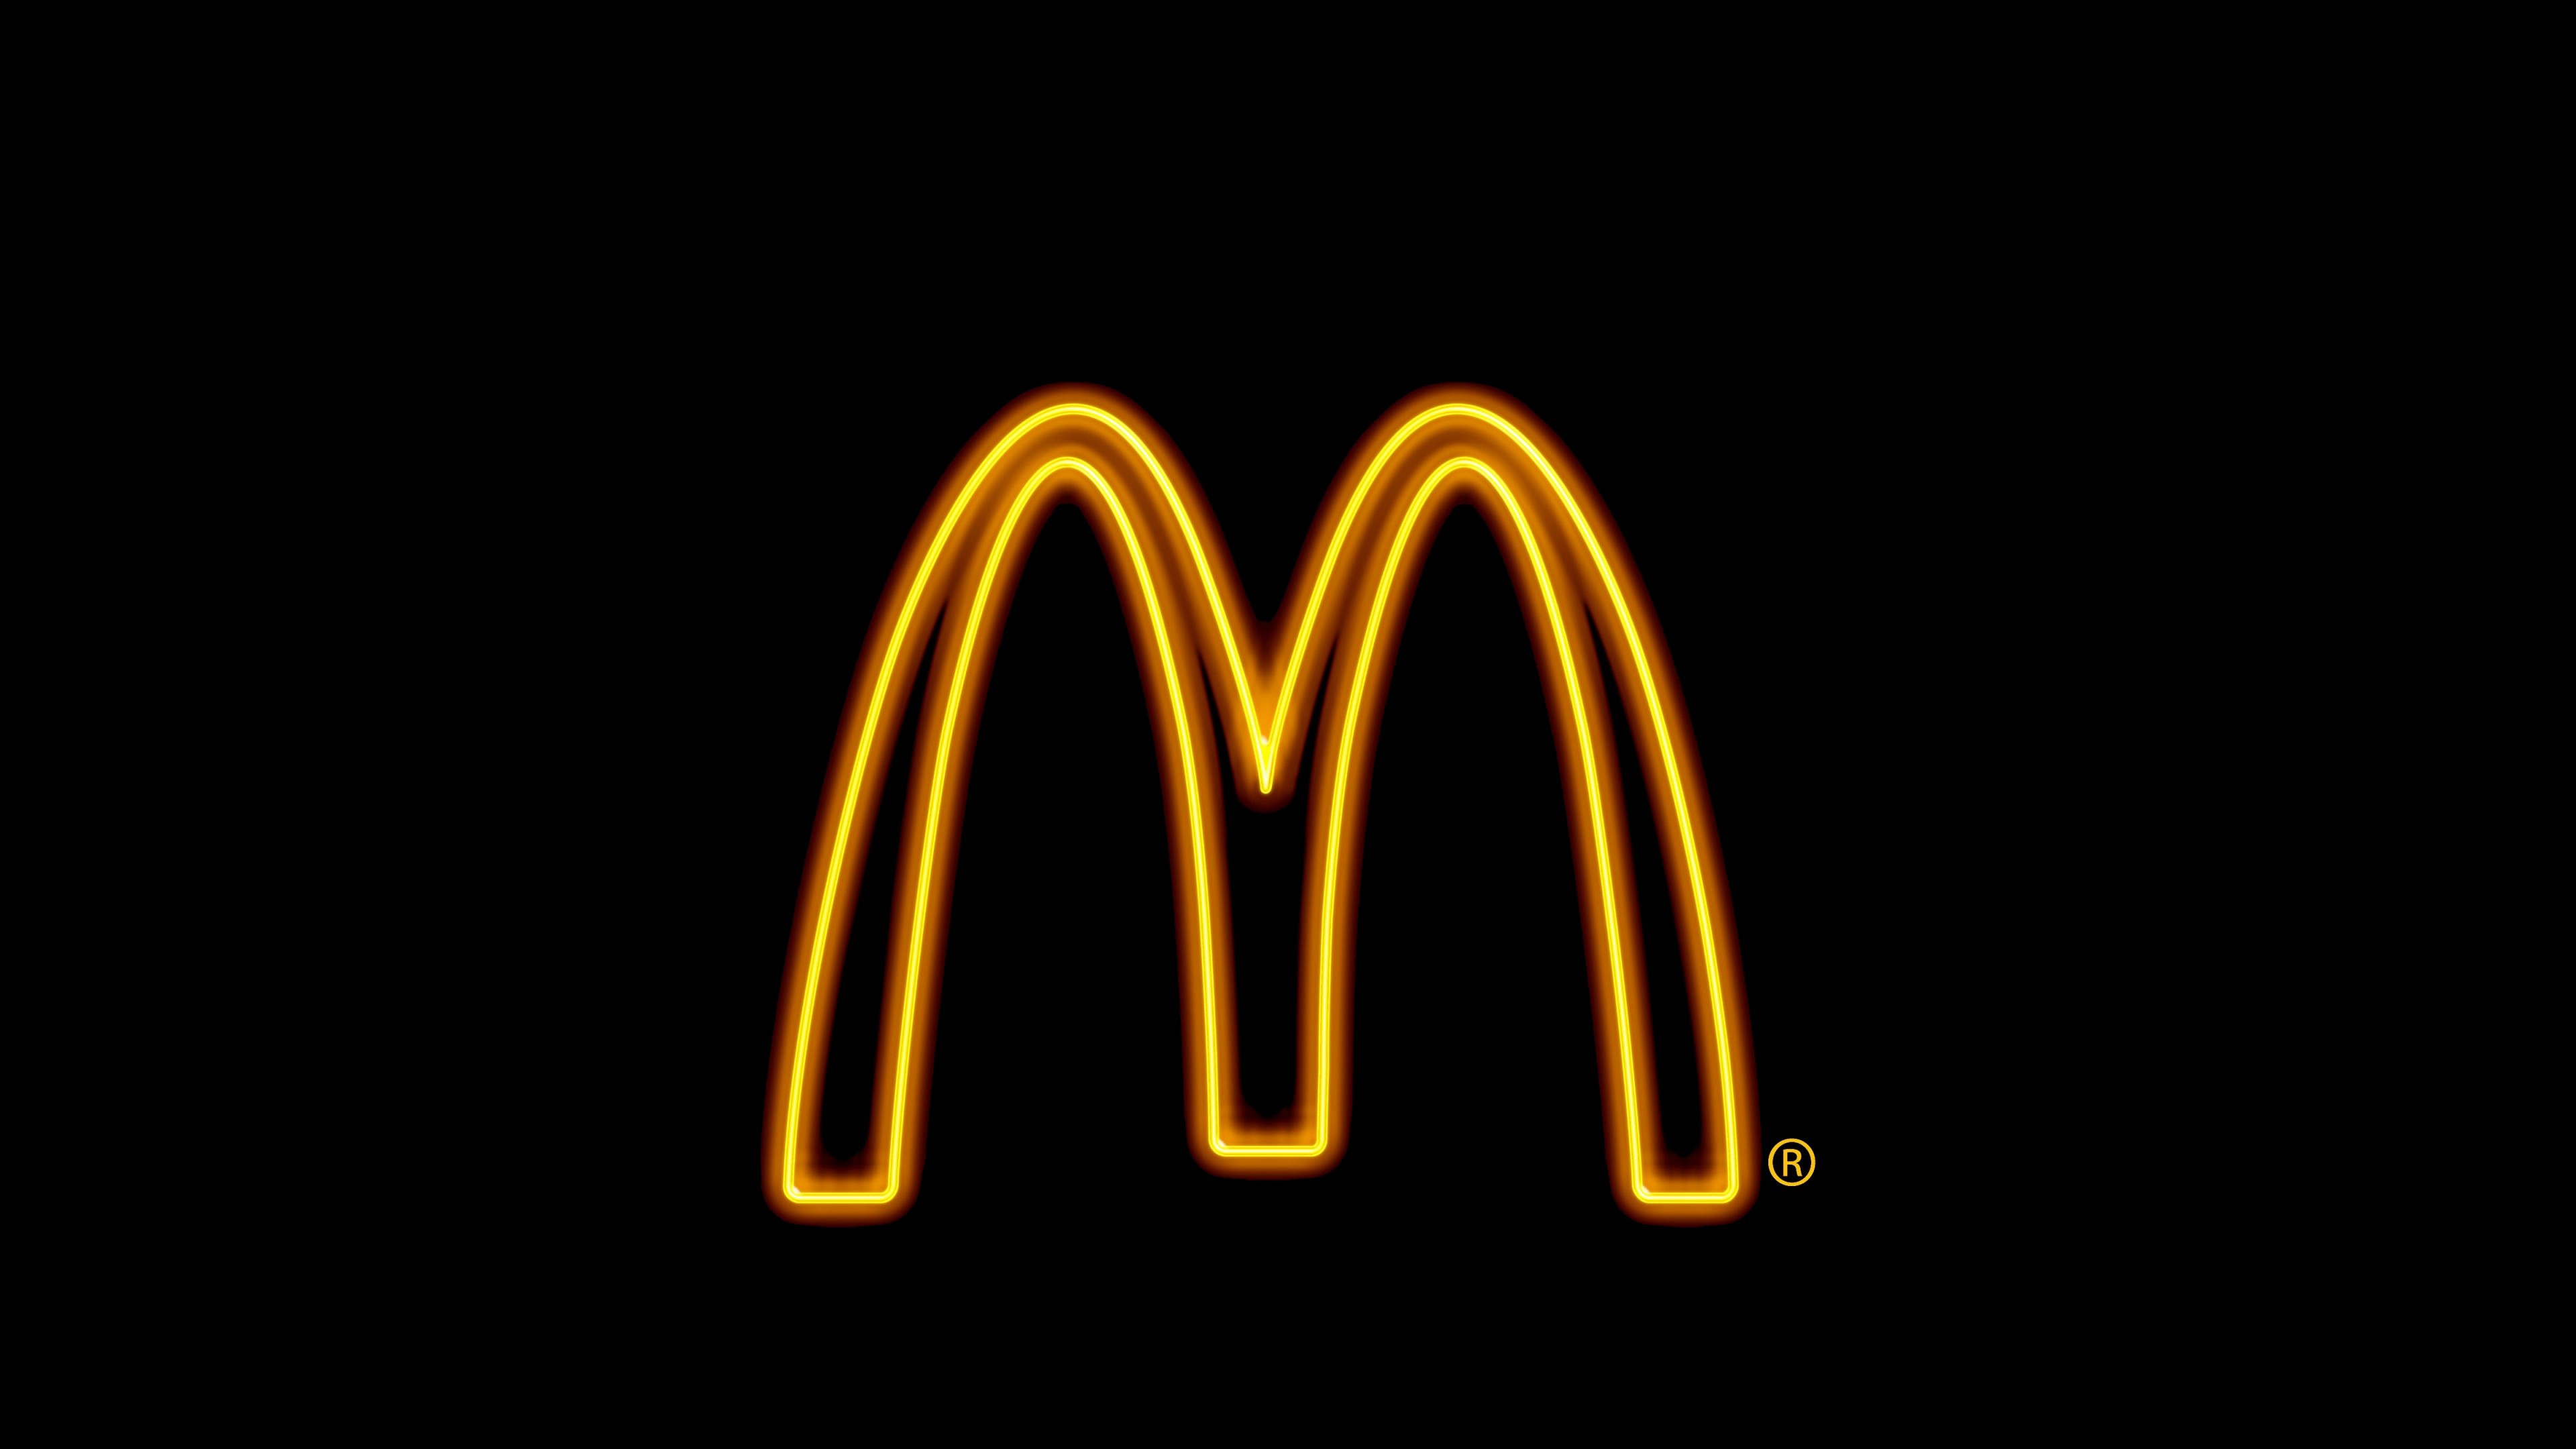 Fast Food Sign Neon Simple Background McDonalds Logo 3840x2160